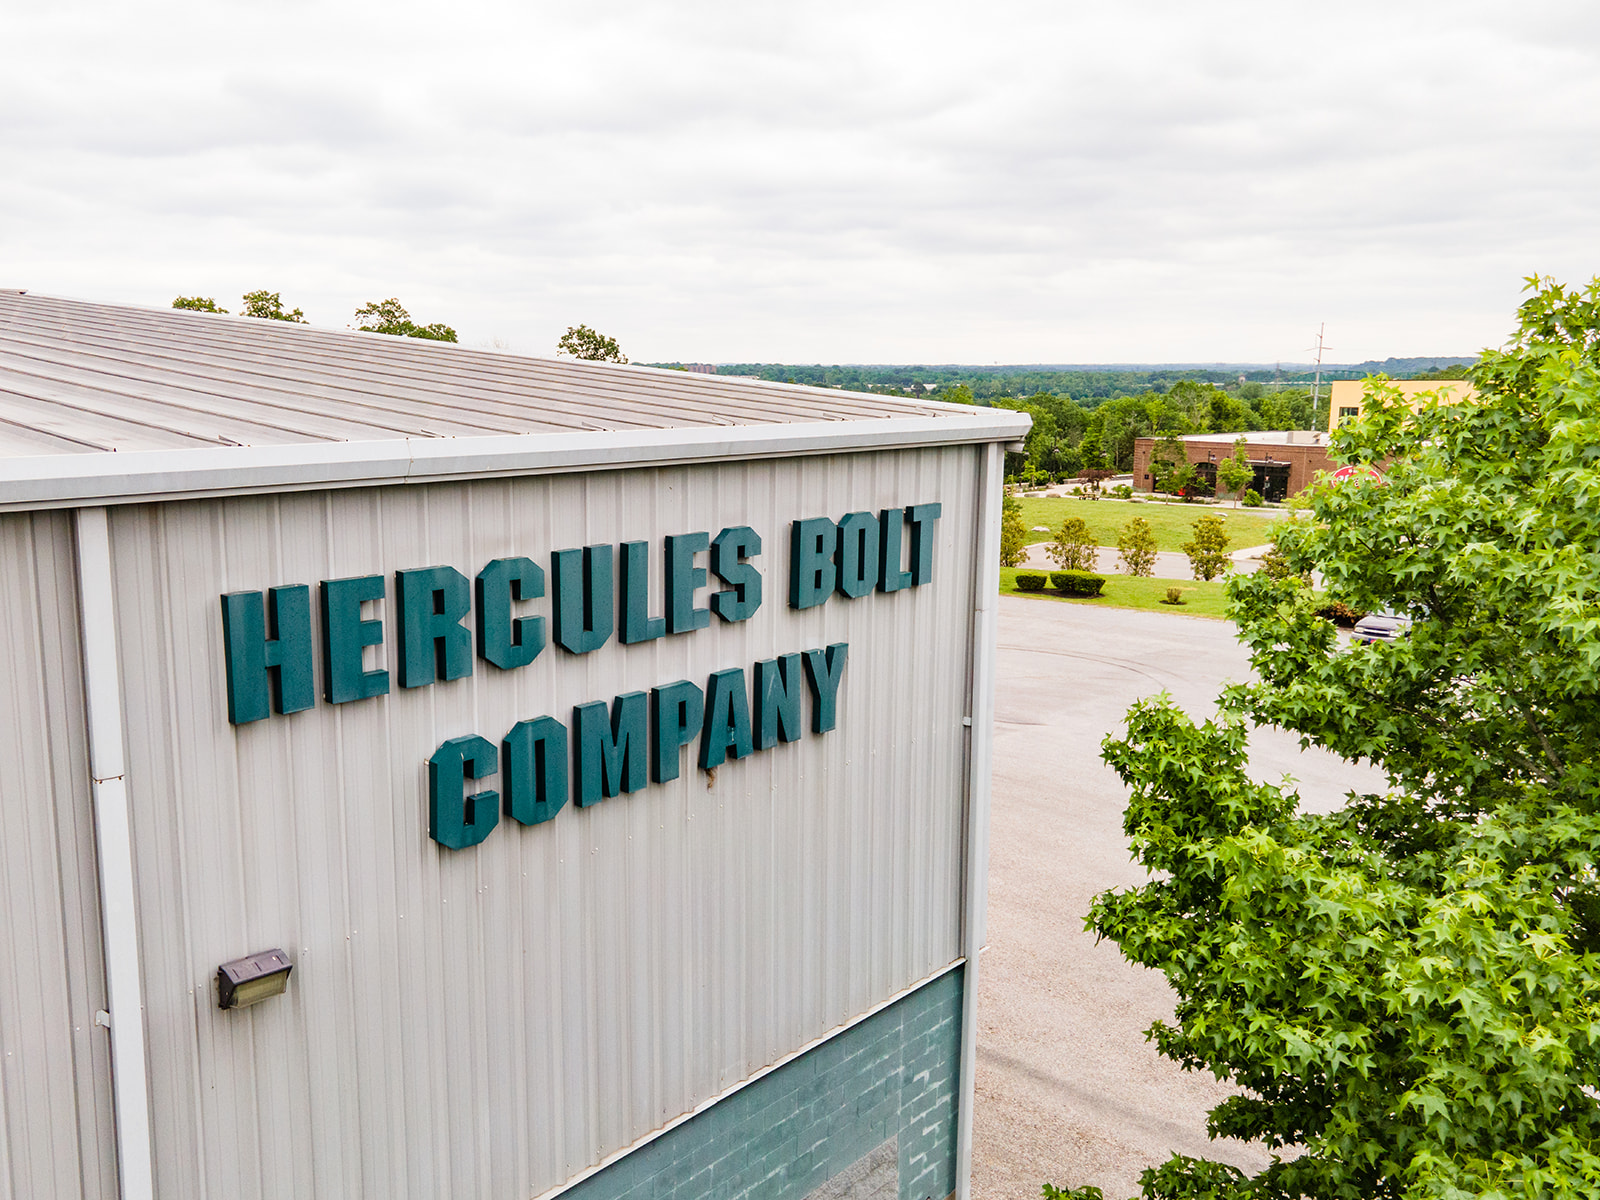 Hercules Bolt Company sign on the exterior of the facility